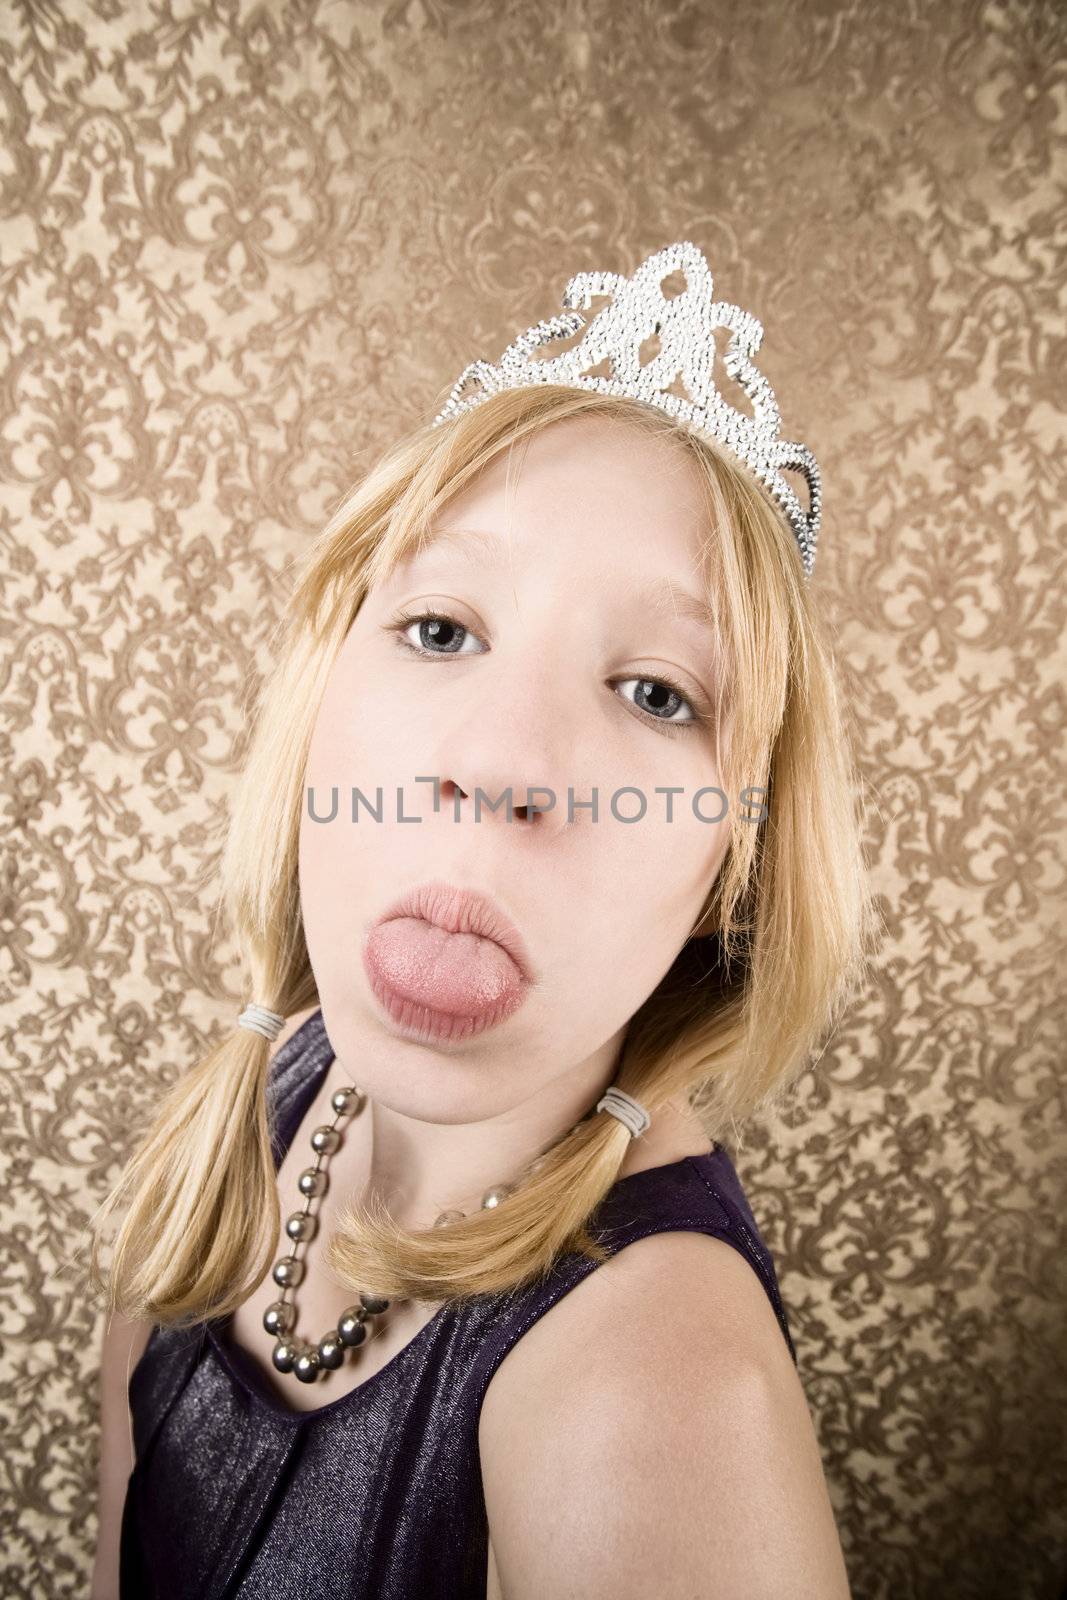 Portrait of pretty pouting young girl wearing a tiara with her tongue out